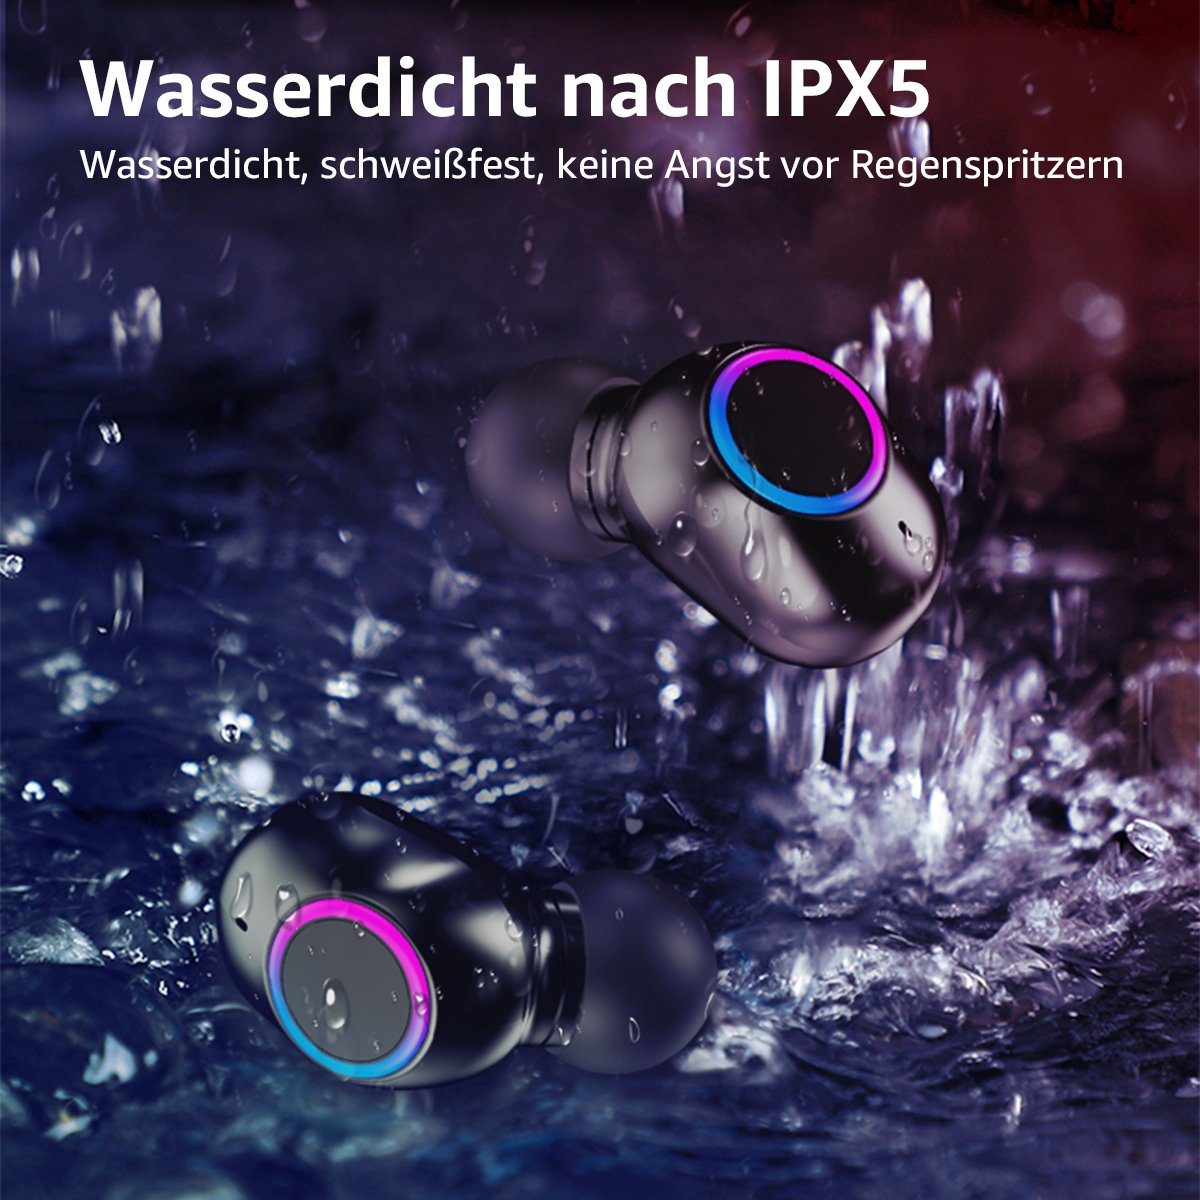 5.2 Kabellos Wireless, (LED-Anzeige, HiFi Stereo In Wireless Assistant, LifeImpree Bluetooth, Ear Bluetooth-Kopfhörer Kopfhörer Bluetooth Siri, Earbuds) Sport Voice